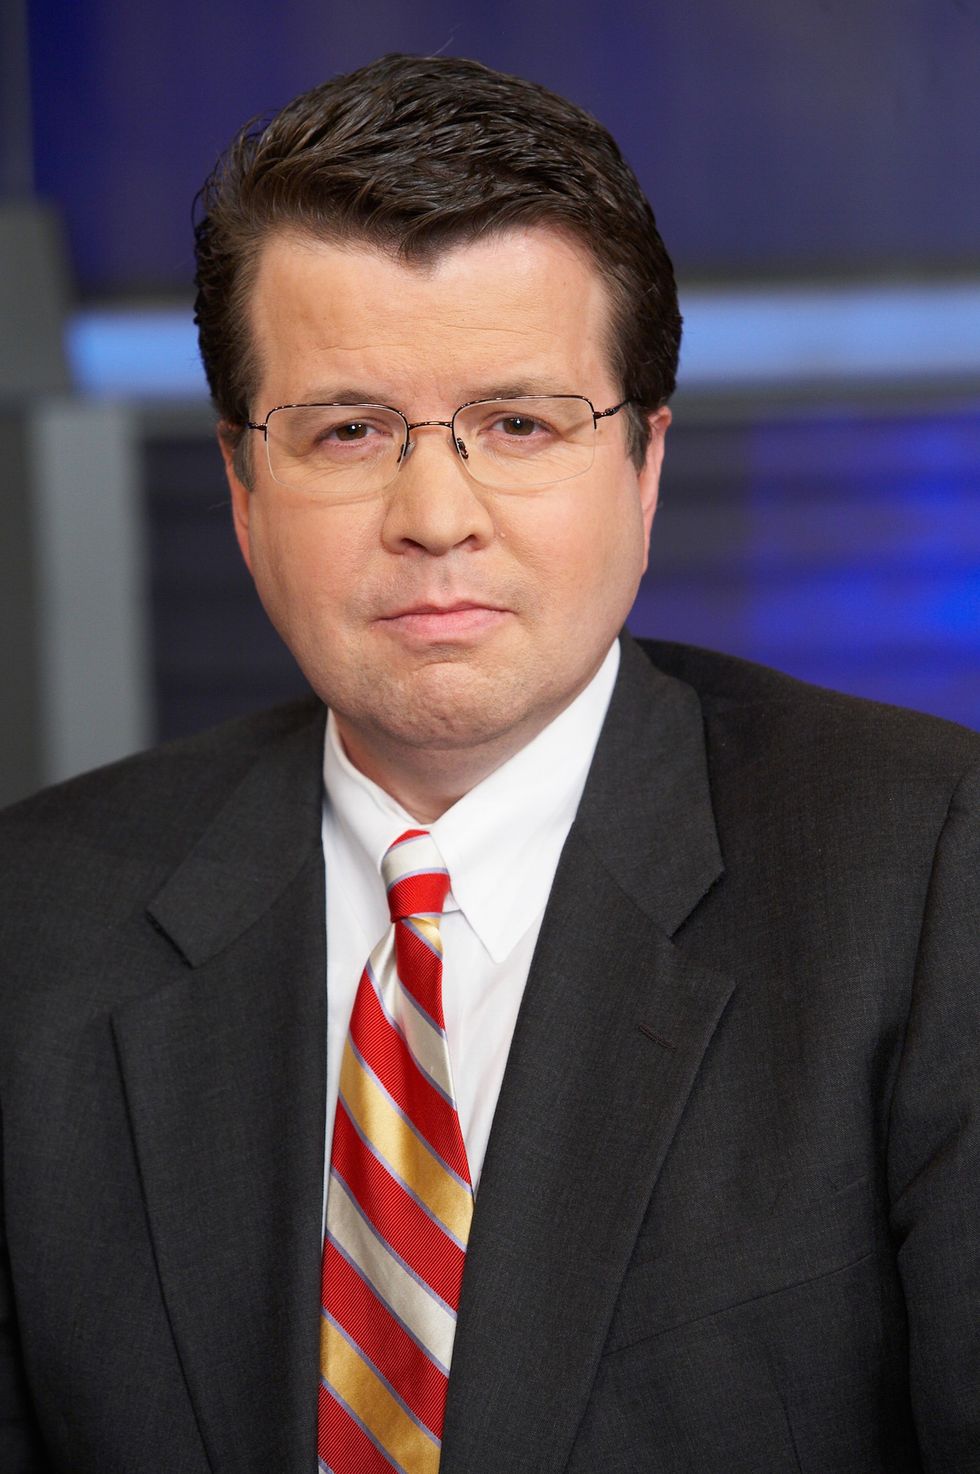 Neil Cavuto Has Some Tough Words for Candidates Ahead of GOP Debate